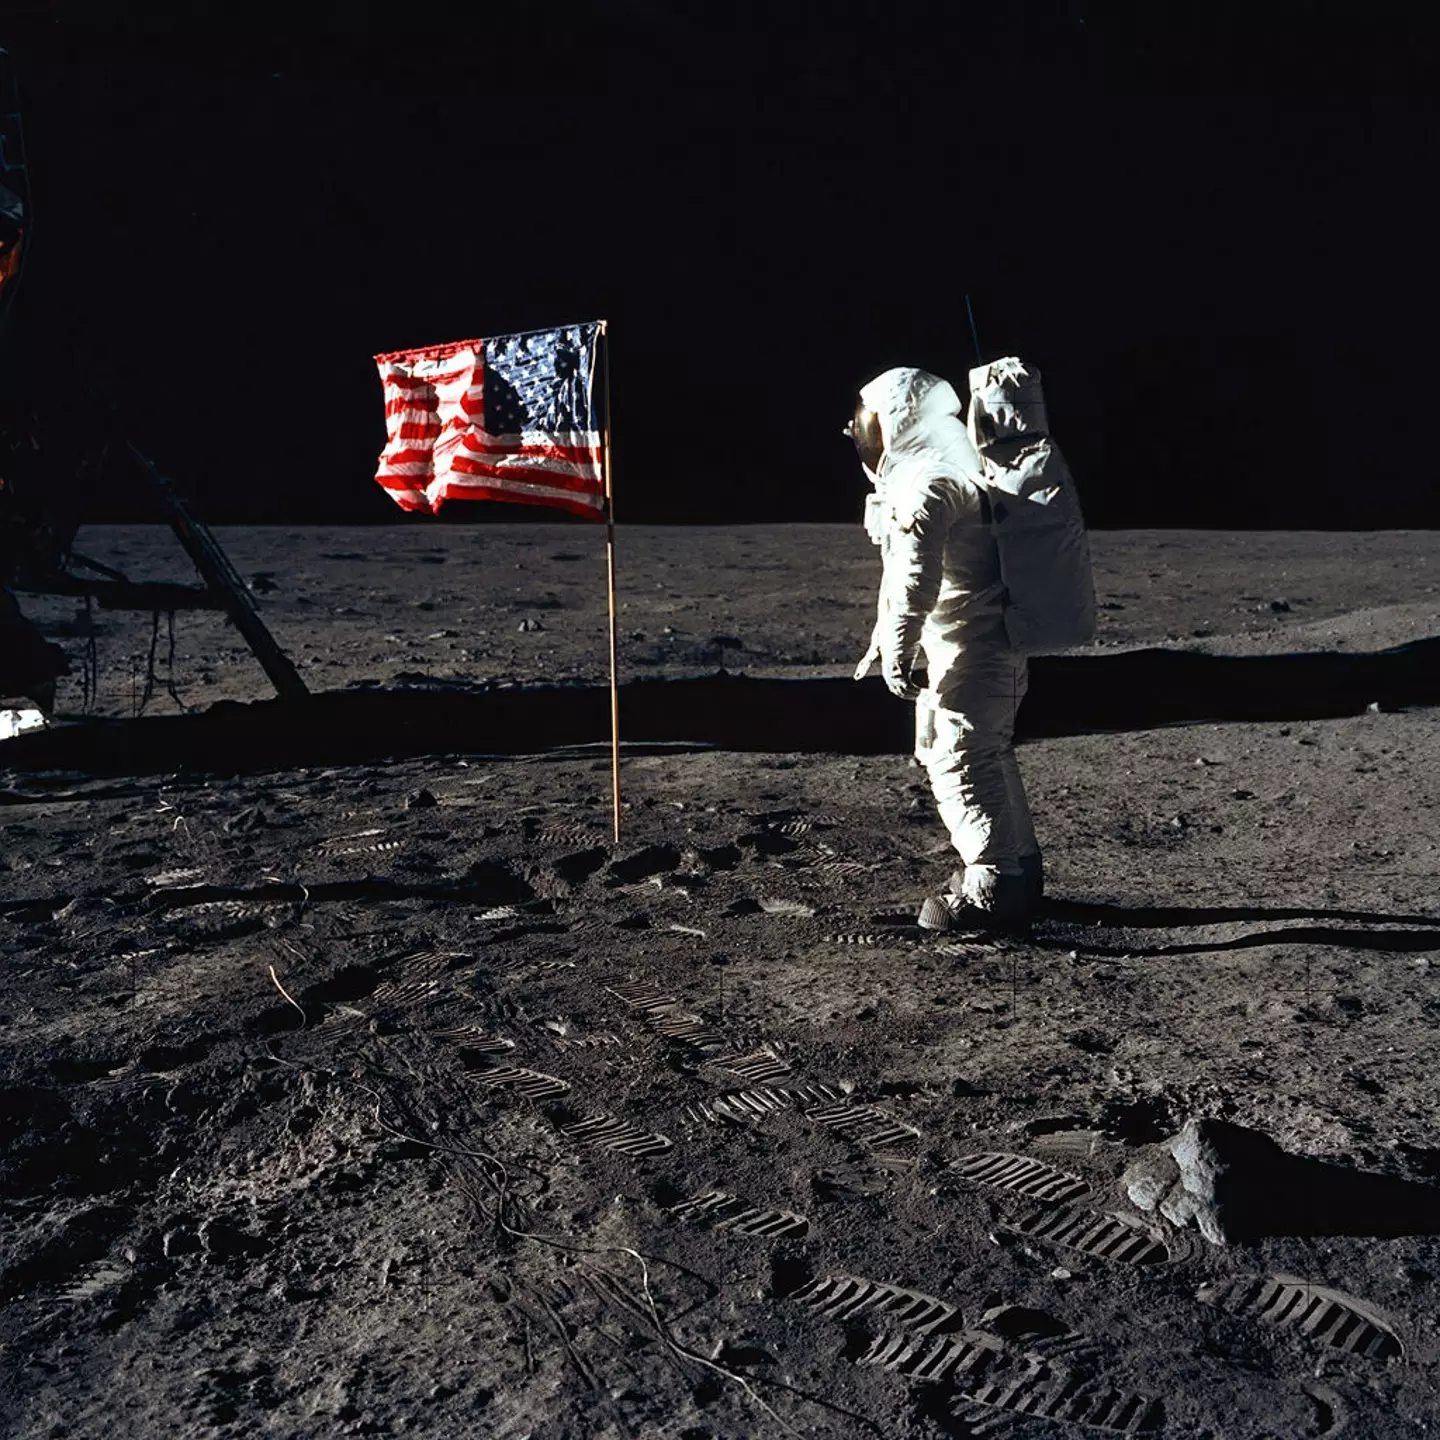 In 1969, history was made when mankind first set foot on the moon's lunar surface.